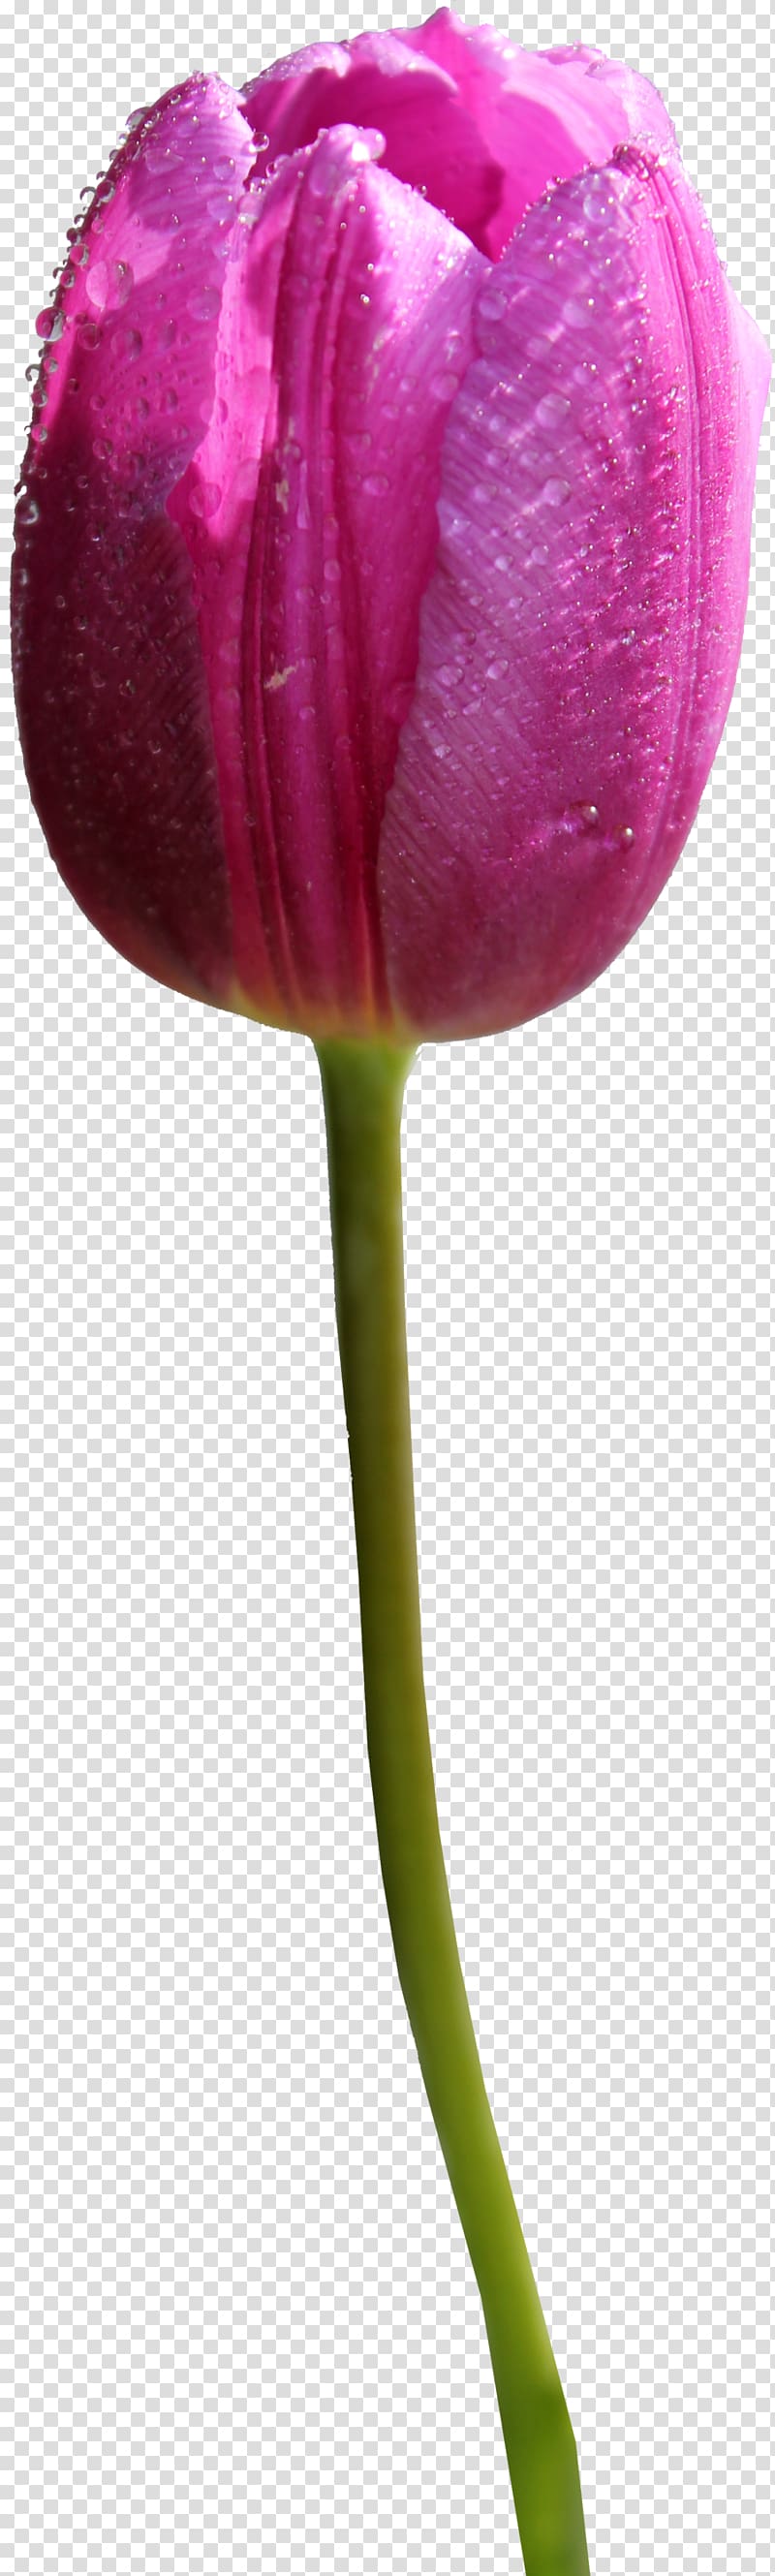 Skagit Valley Tulip Festival , Tulip Hd transparent background PNG clipart